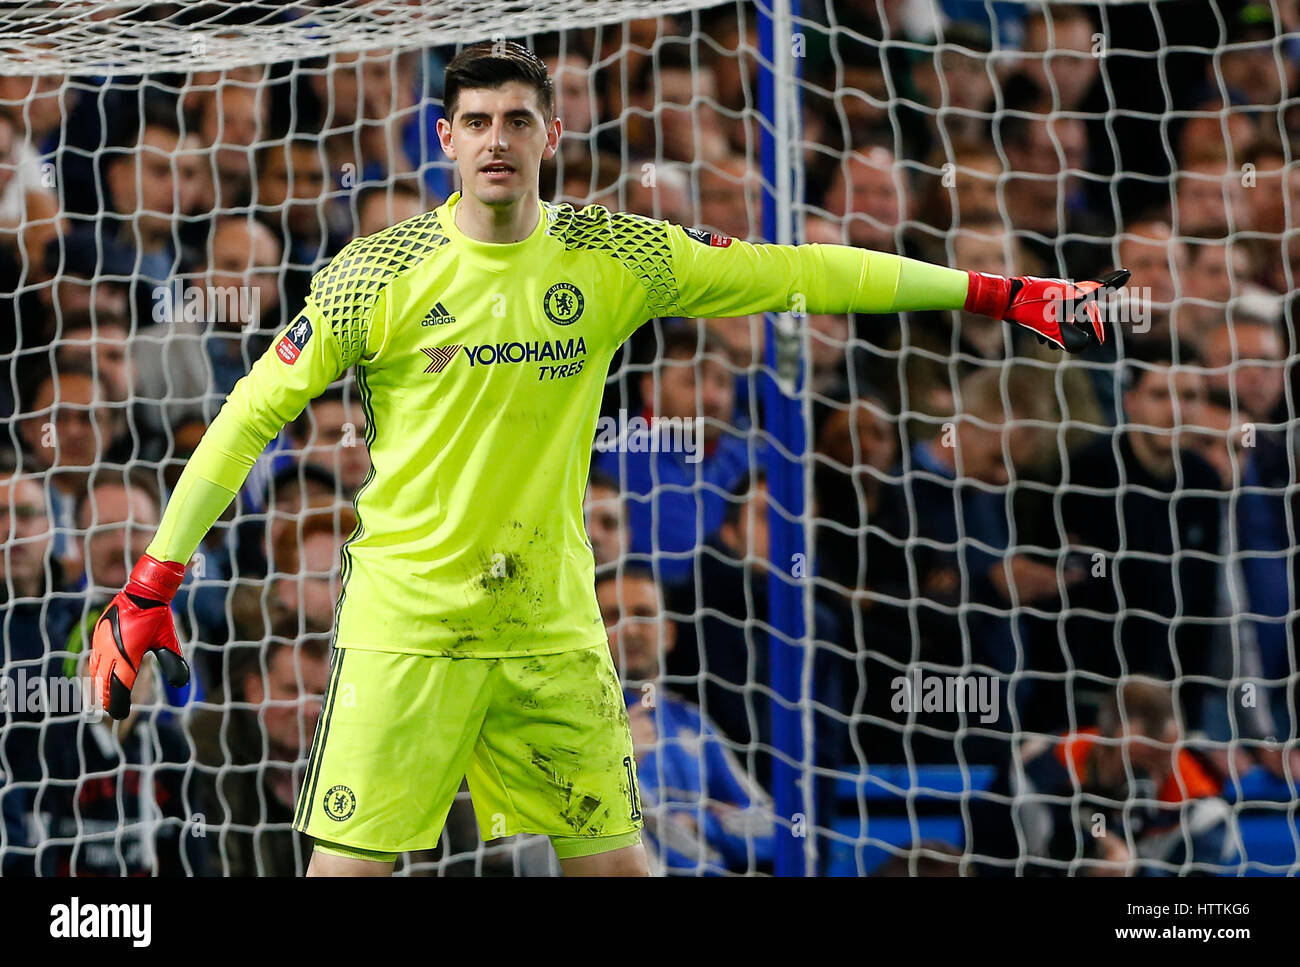 Thibaut Courtois of Chelsea during the FA Cup match between Chelsea and  Manchester United at Stamford Bridge in London. March 13, 2017. James  Boardman / Telephoto Images +44 7967 642437 Stock Photo - Alamy